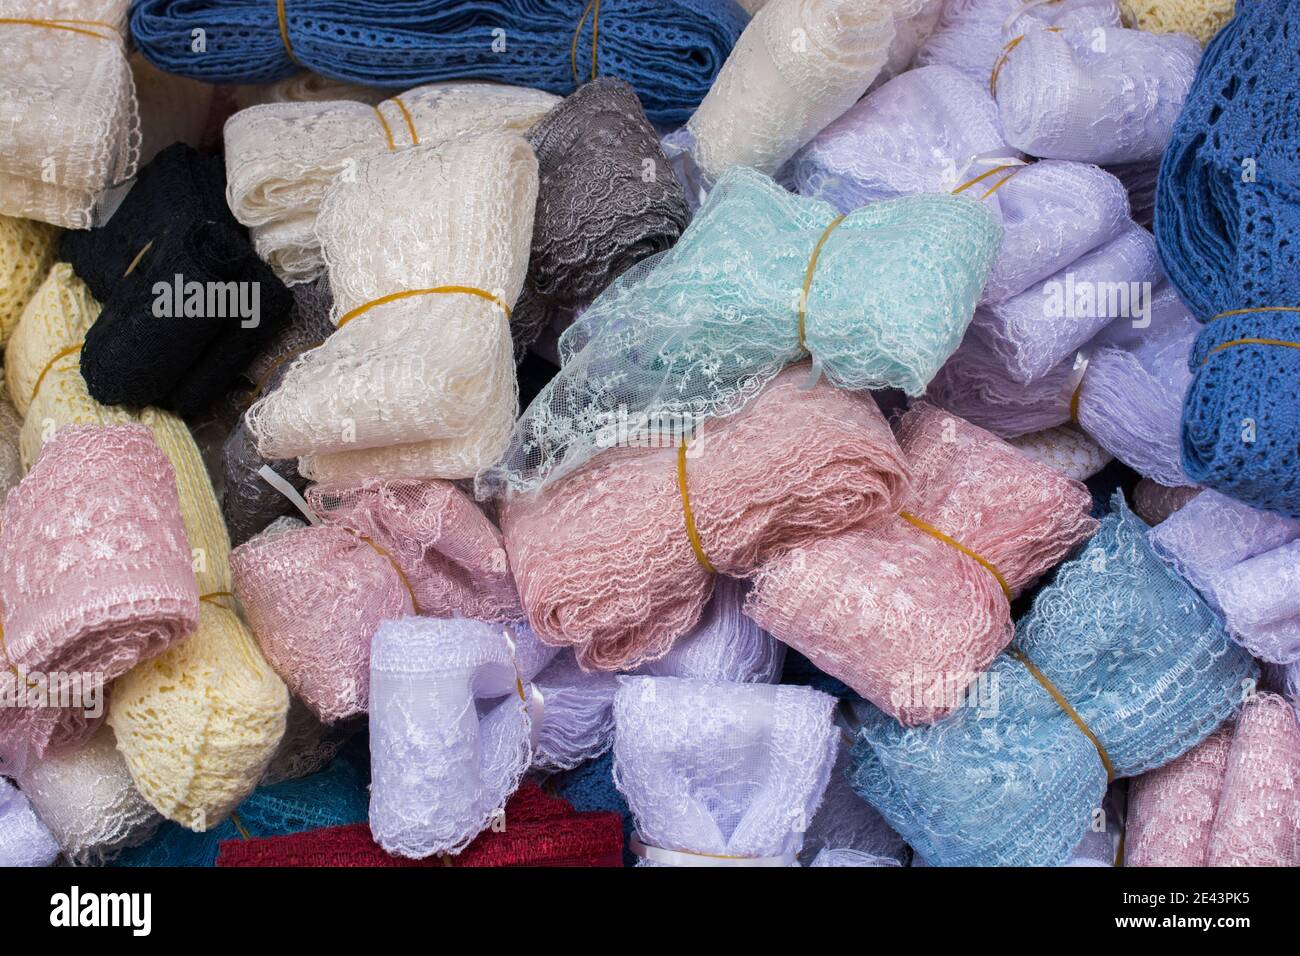 Pile of colorful embroidered lace ribbons captured in a market Stock Photo